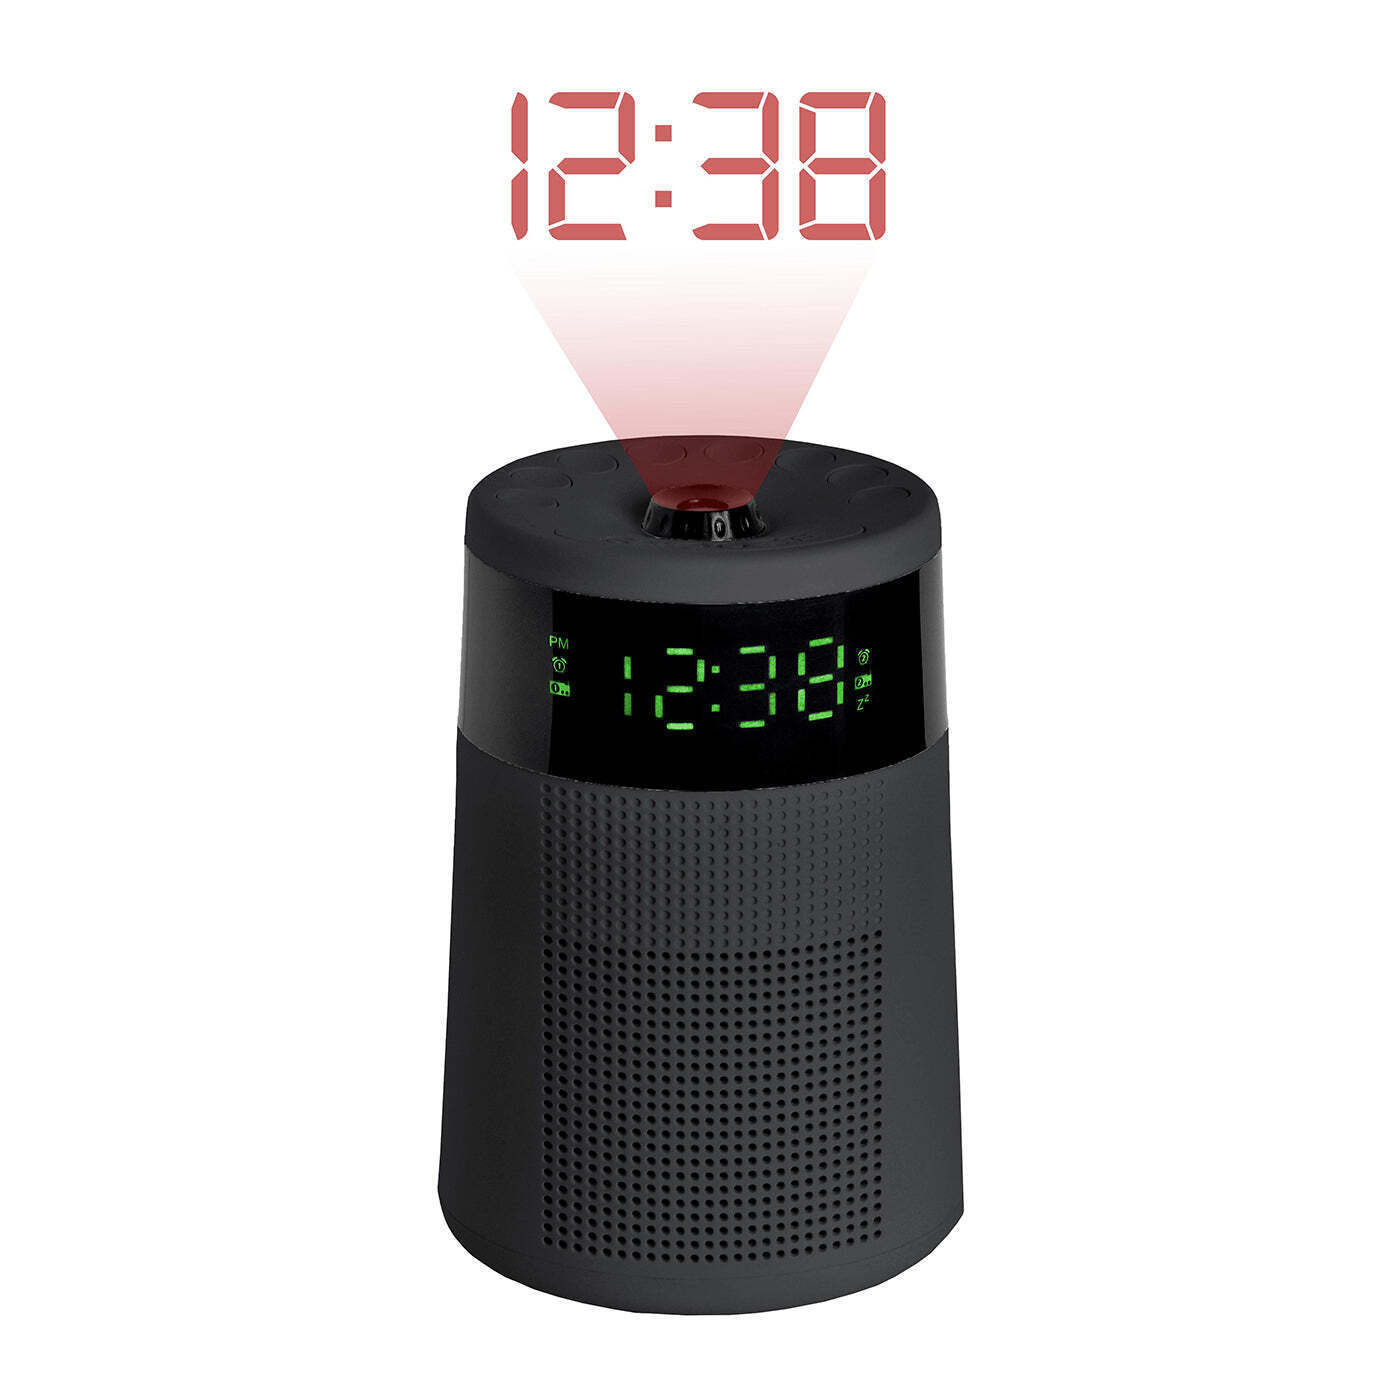 Sleek Projector Alarm Clock & Radio - Projects the Time onto the Ceiling - 0